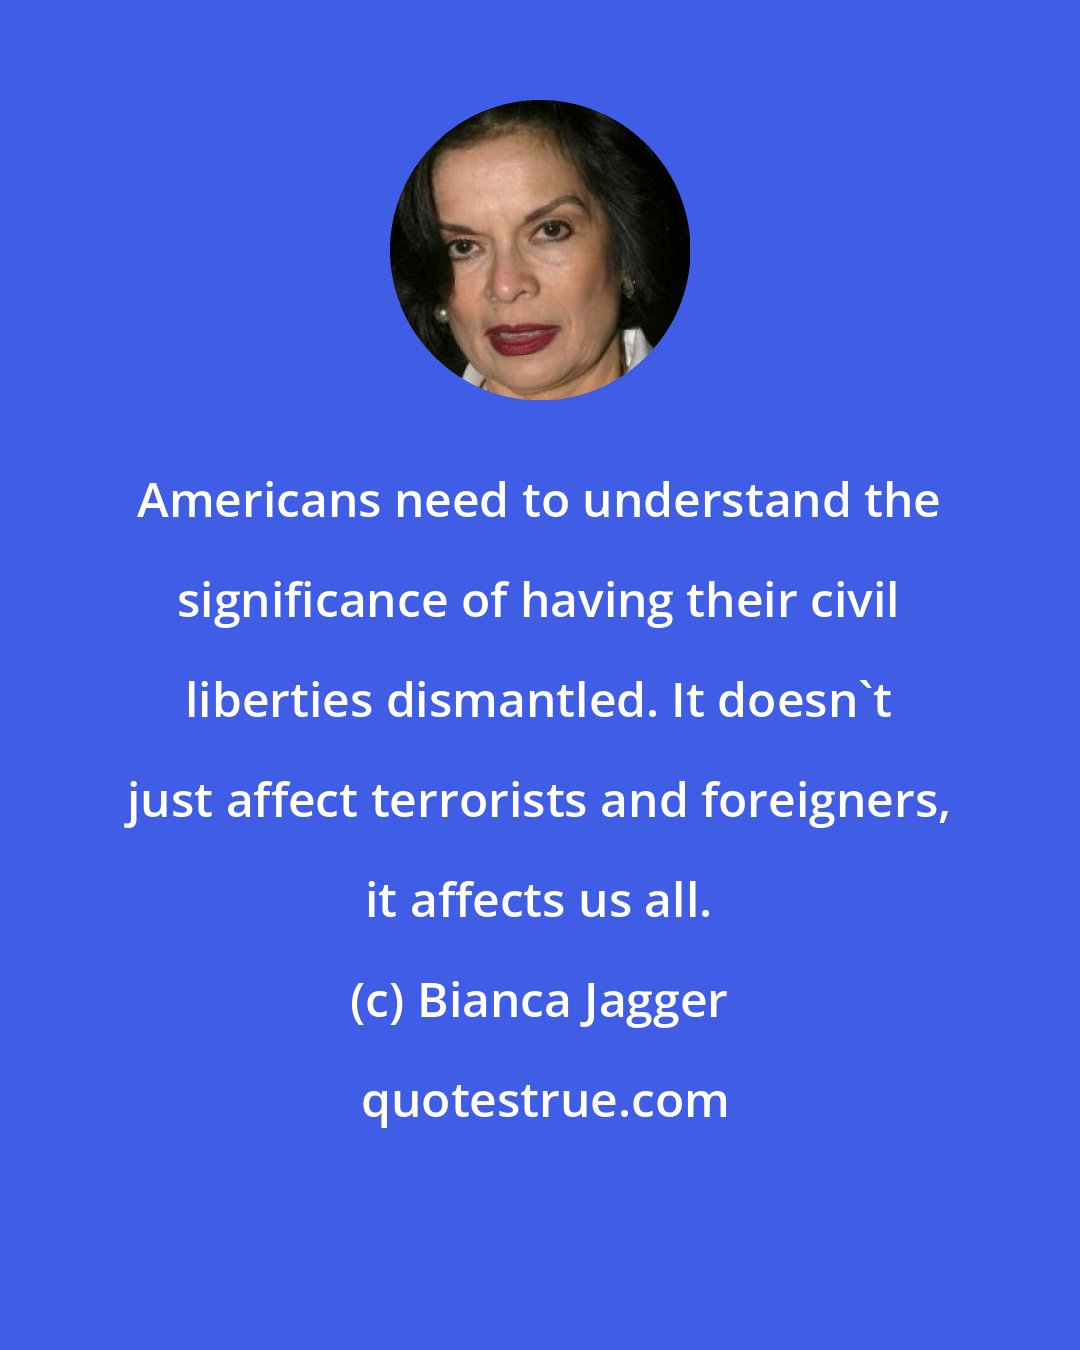 Bianca Jagger: Americans need to understand the significance of having their civil liberties dismantled. It doesn't just affect terrorists and foreigners, it affects us all.